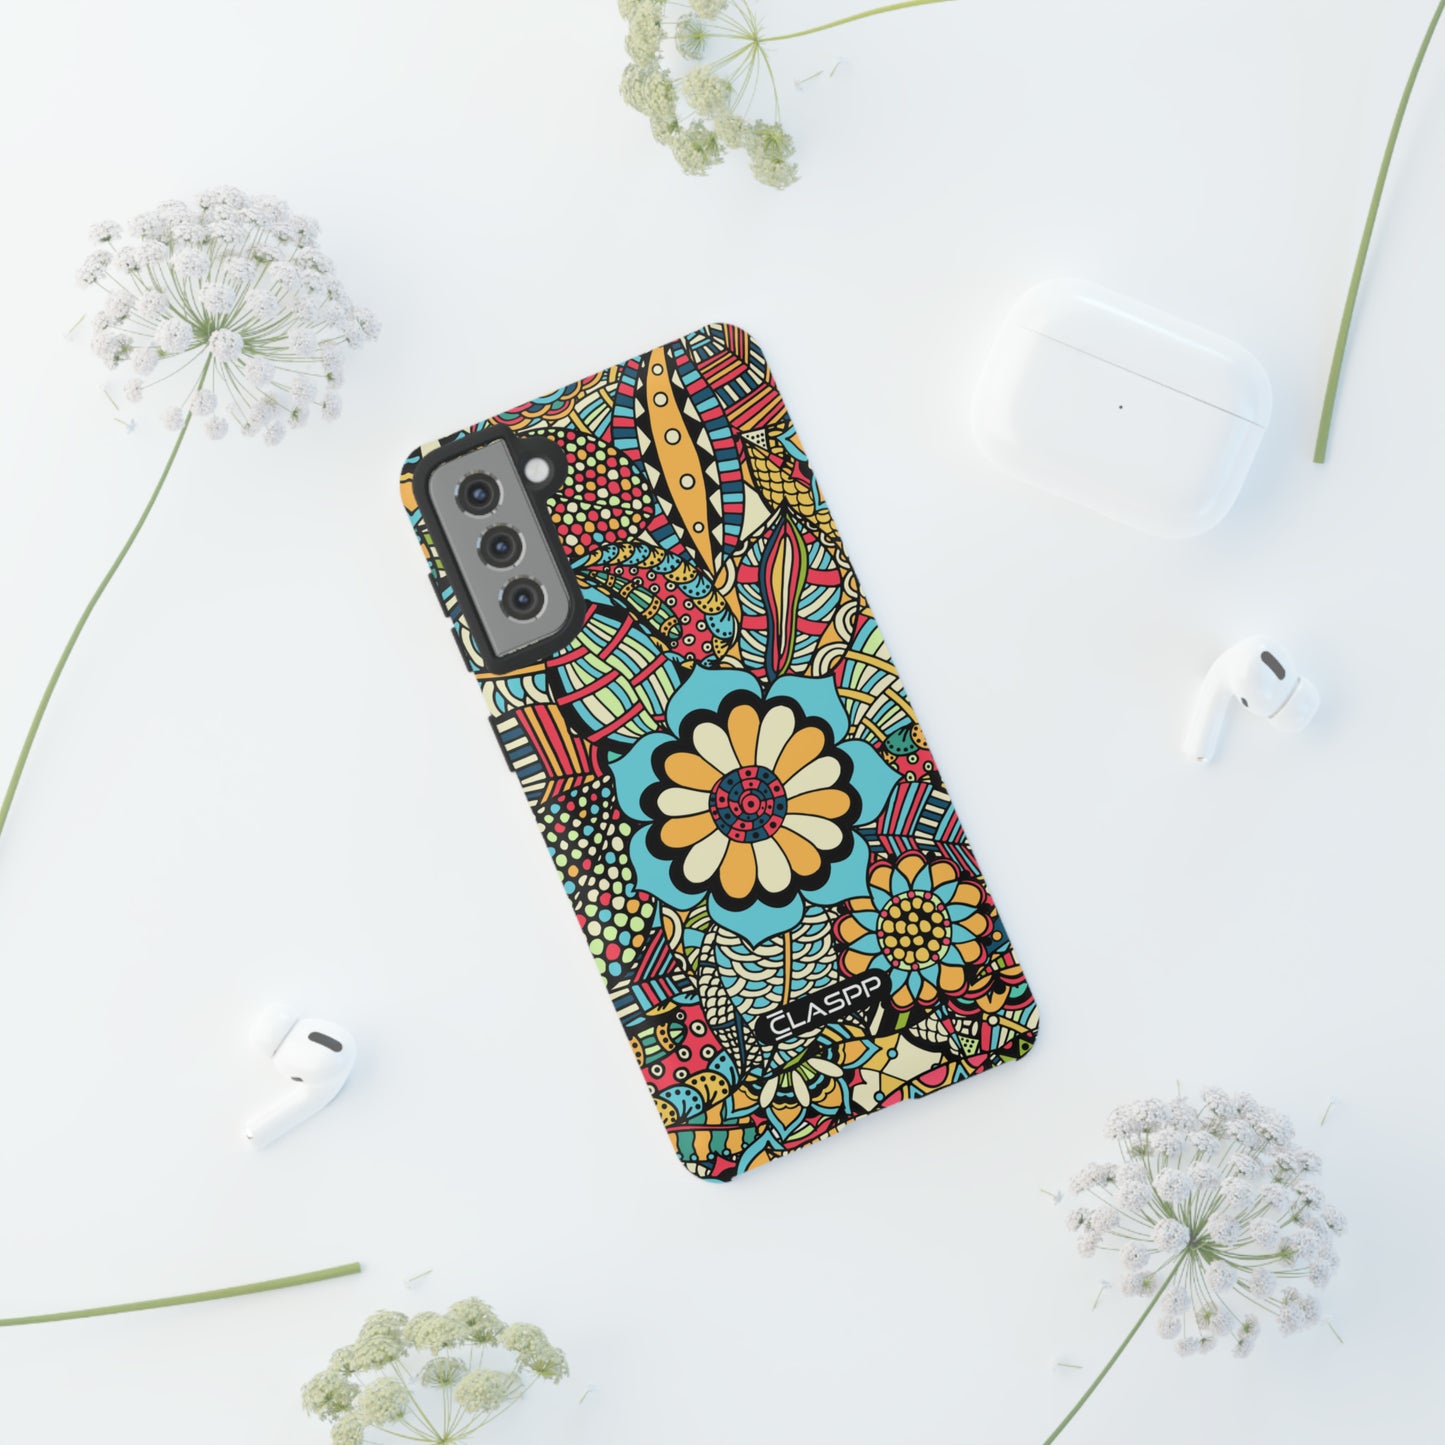 Colorful Mural | Hardshell Dual Layer Phone Case